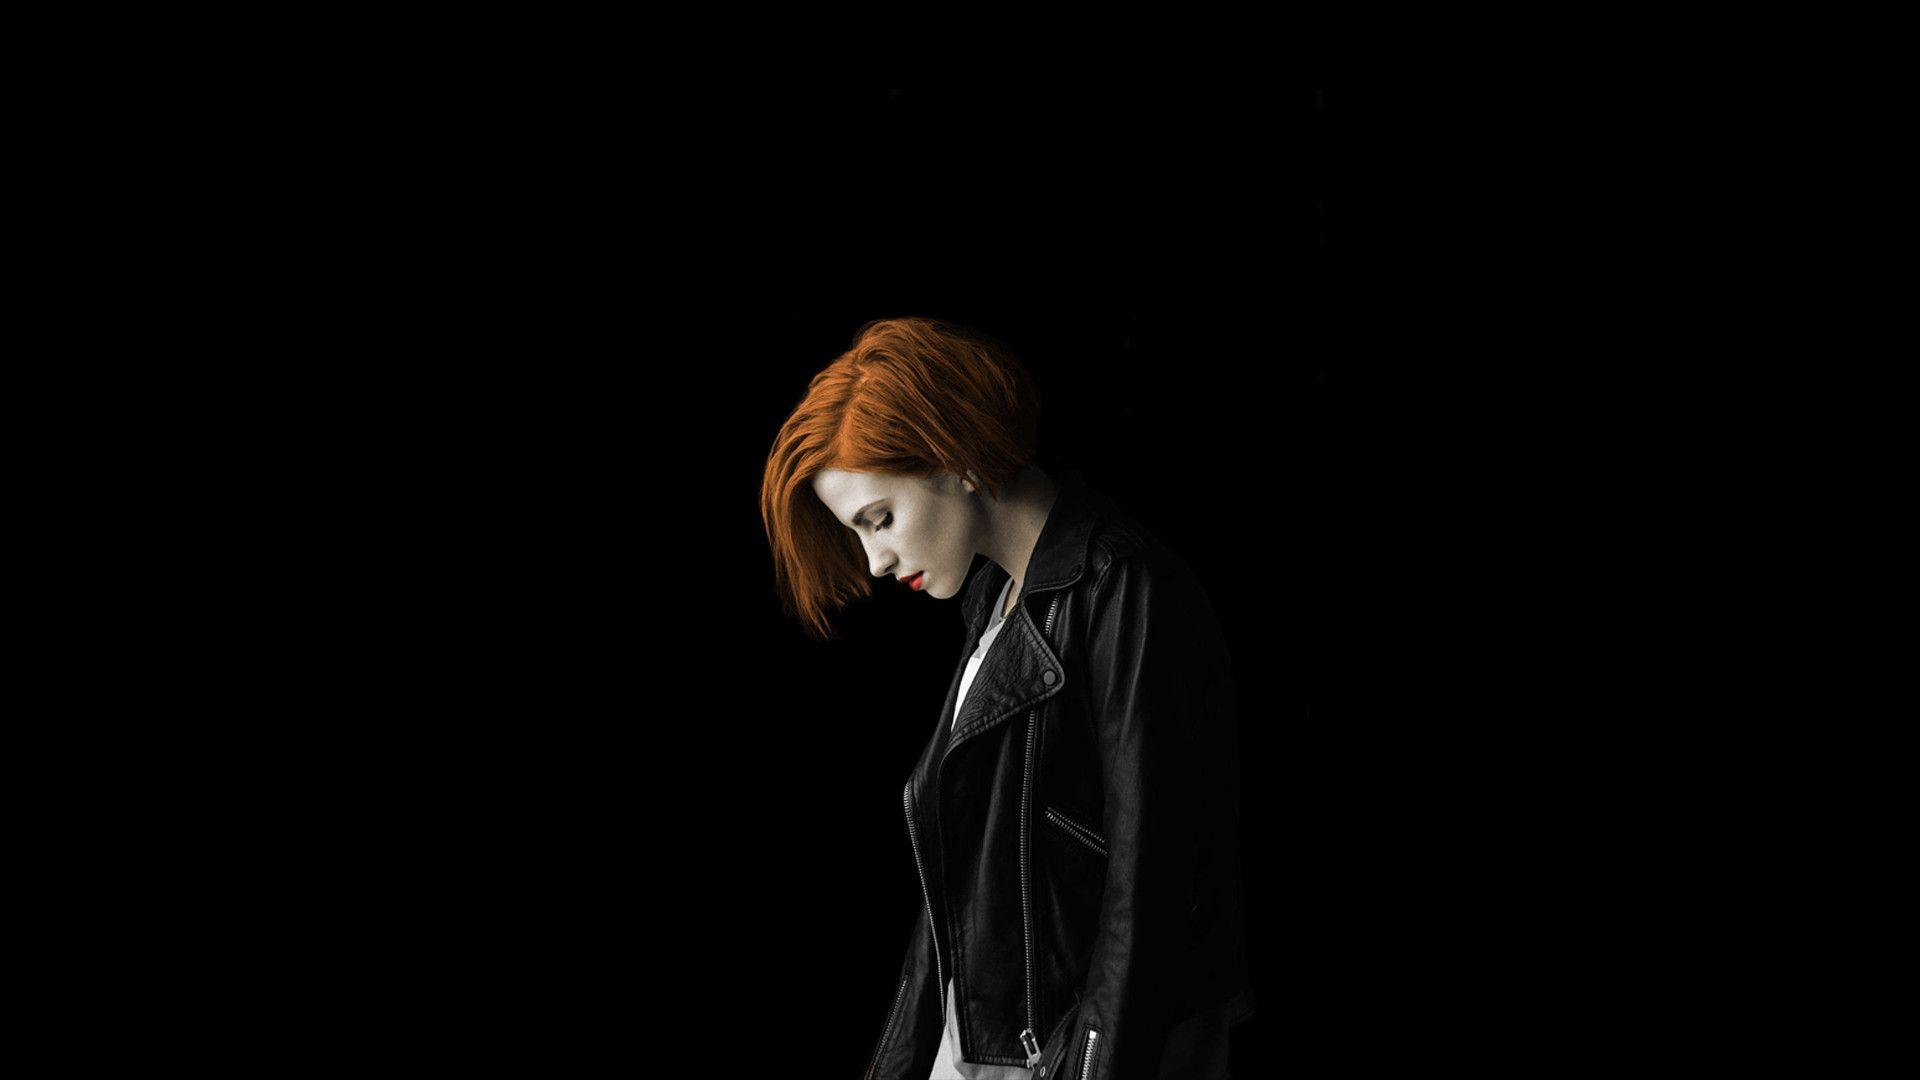 Hayley Williams aesthetic wallpaper  Paramore wallpaper Paramore  Paramore hayley williams